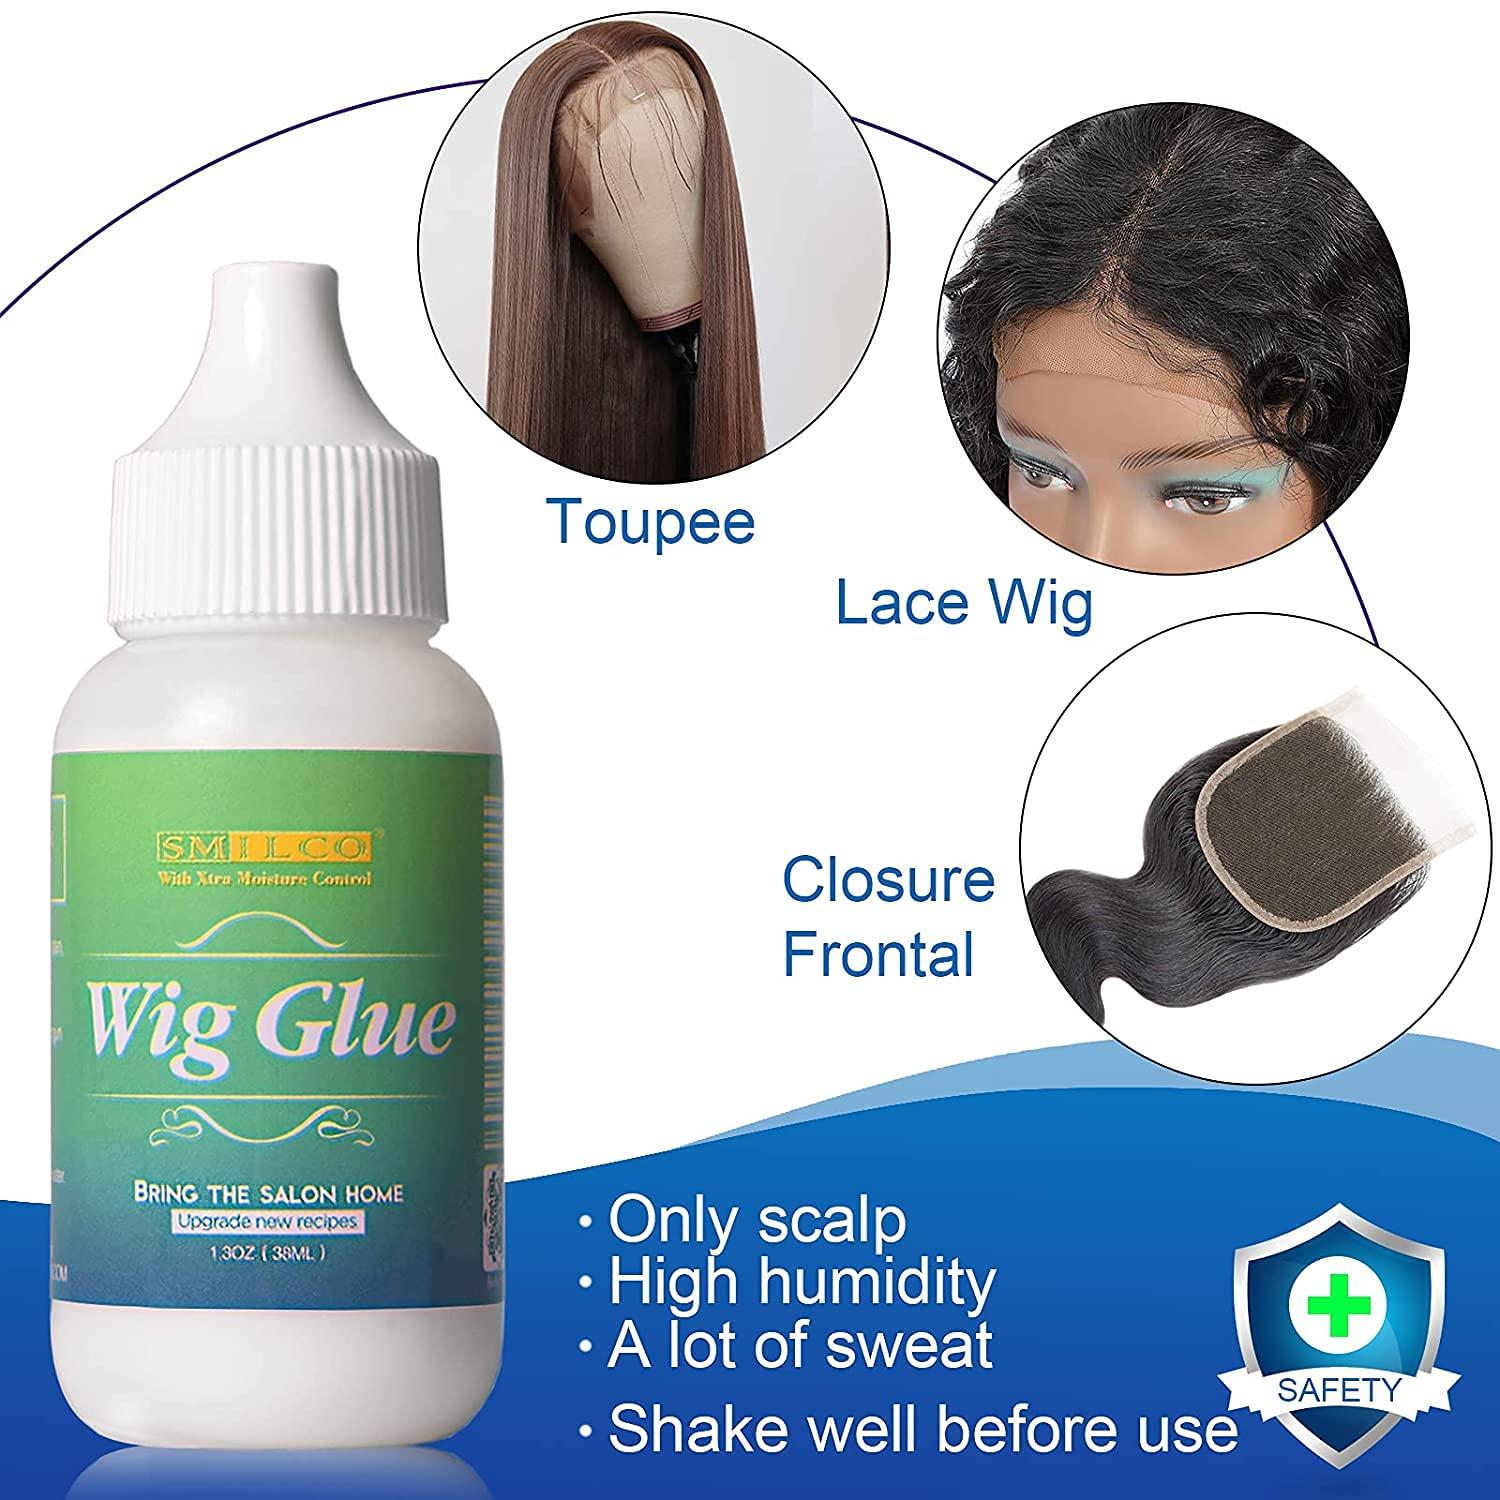 The Best Wig Glue For Ensuring a Good Hair Day Stays That Way